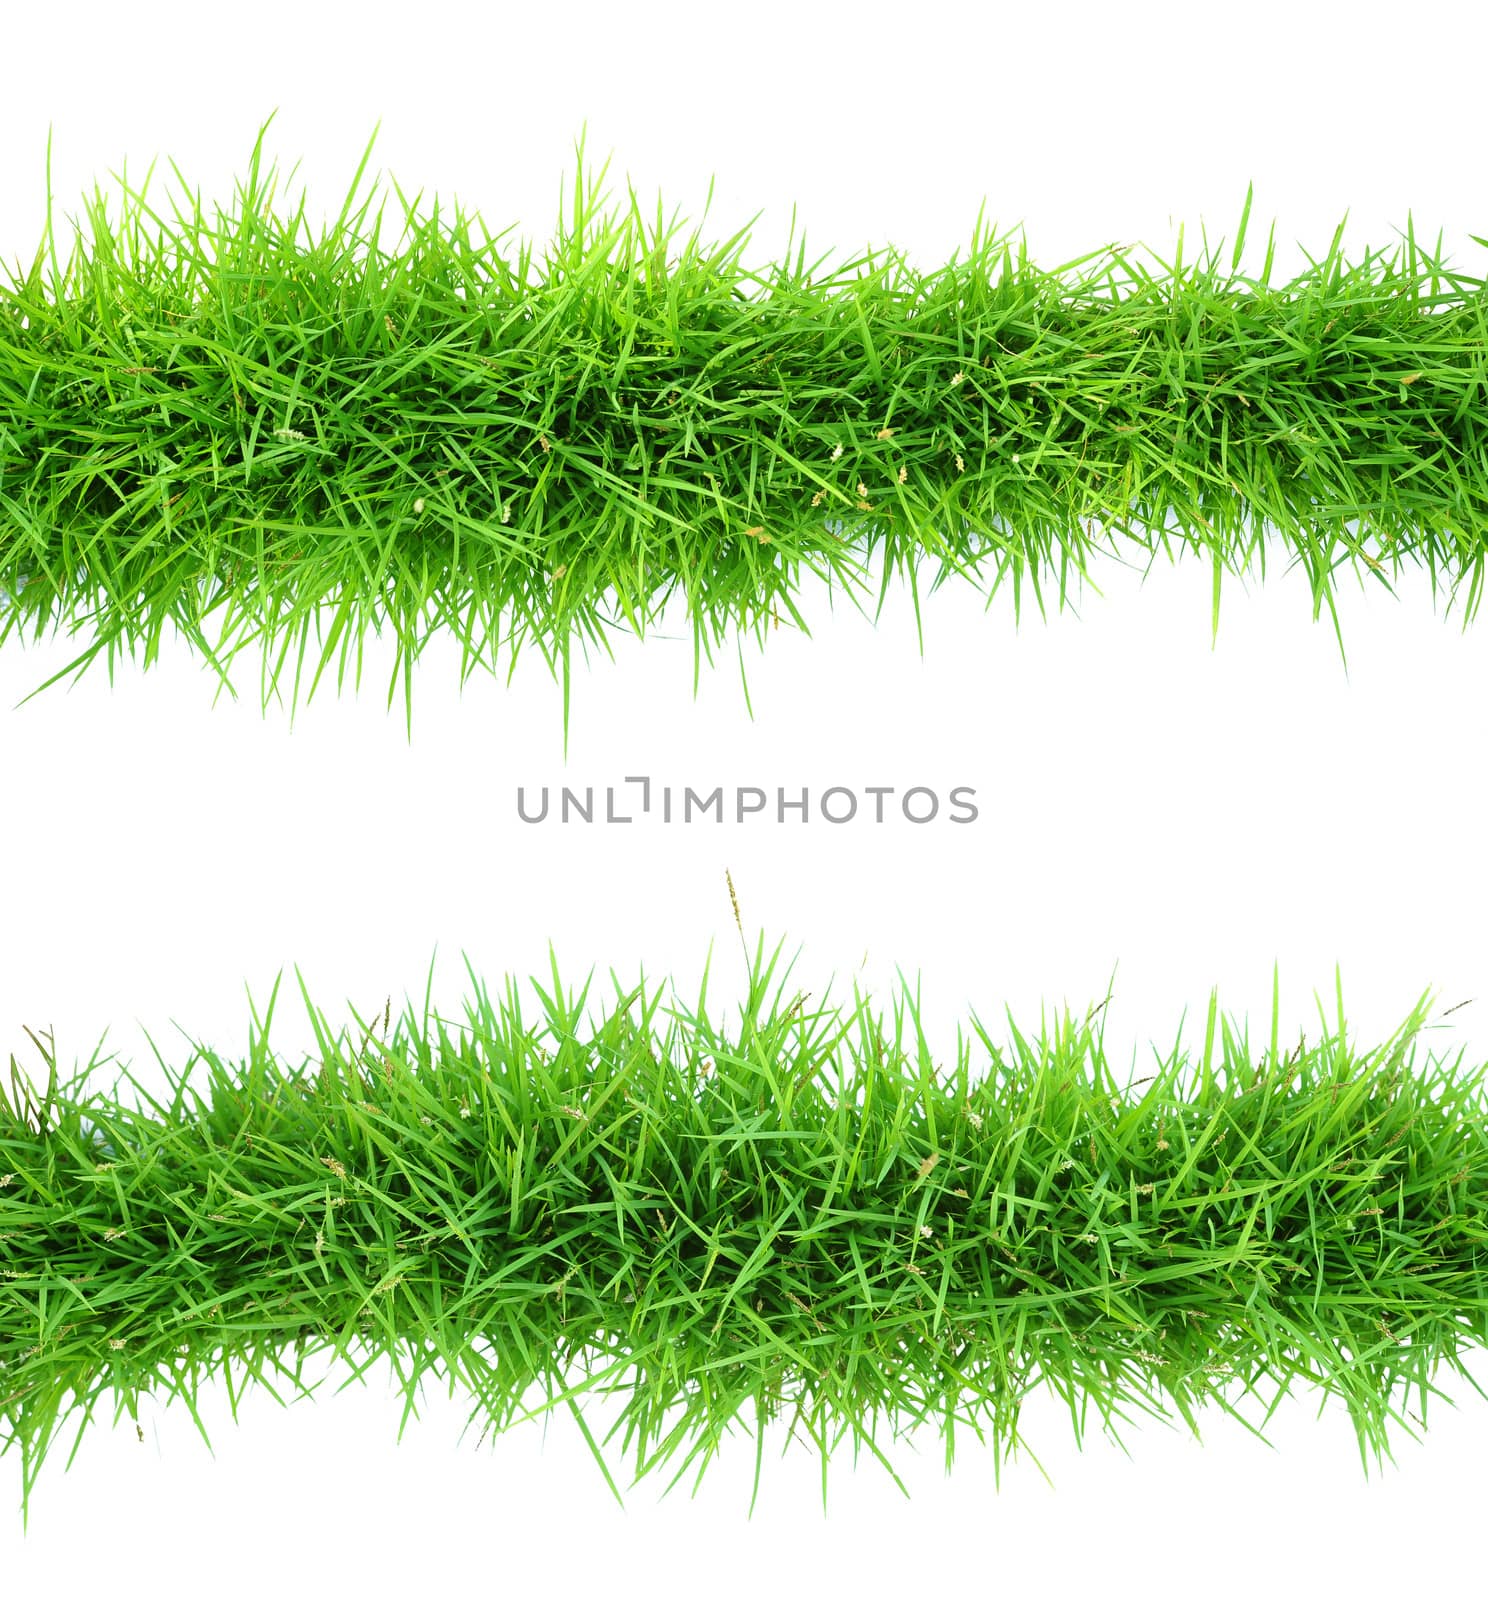 Top view of grass on white background